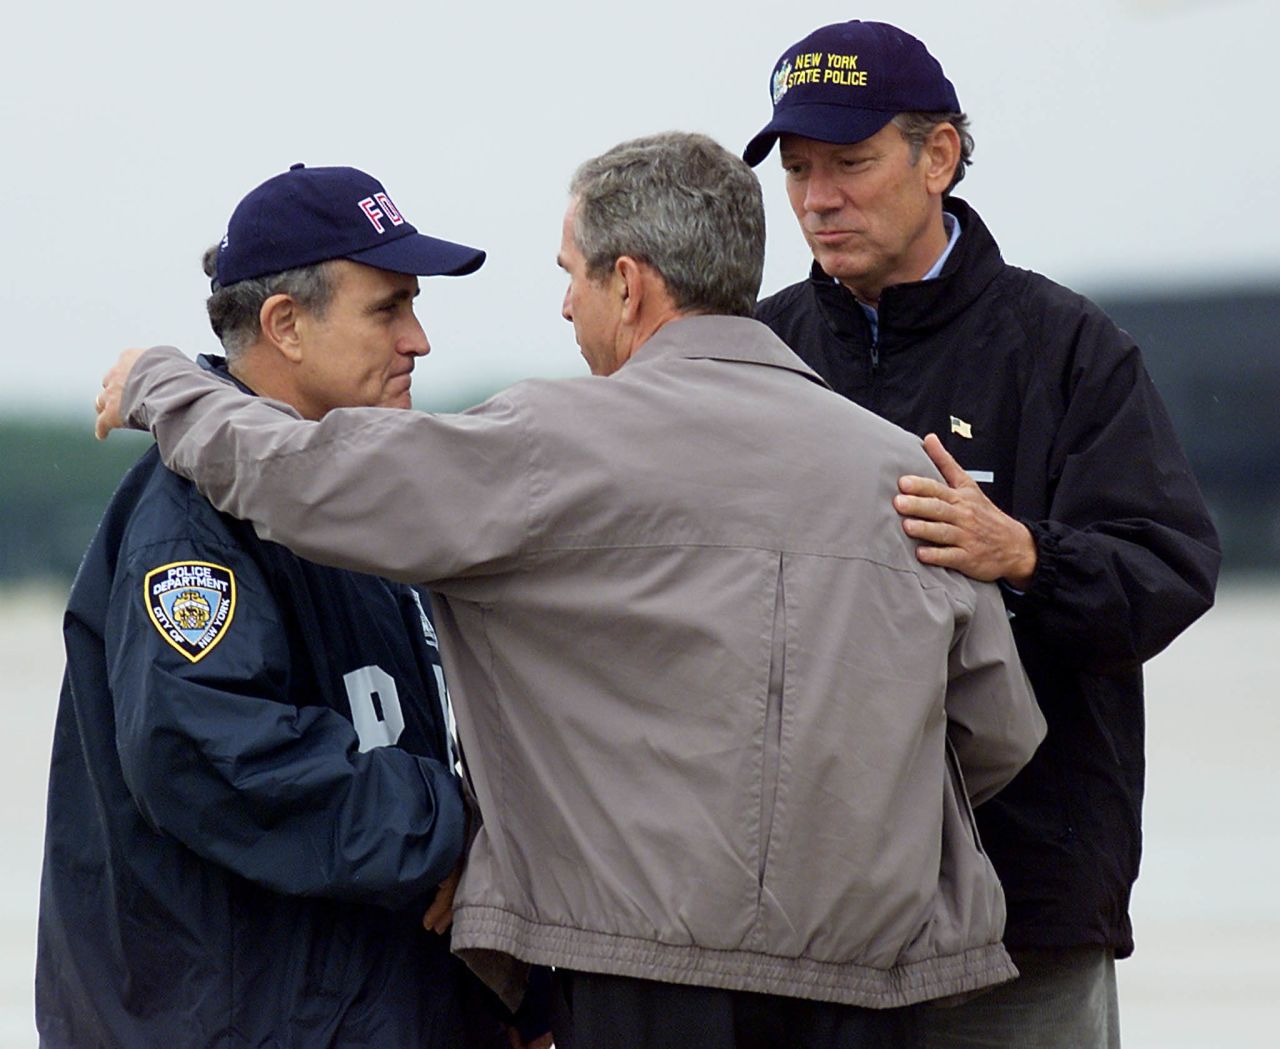 Then-U.S. President George W. Bush, center, greets then-New York City Mayor Rudy Giuliani, left, and then-New York Governor George Pataki September 14, 2001 in New York. 